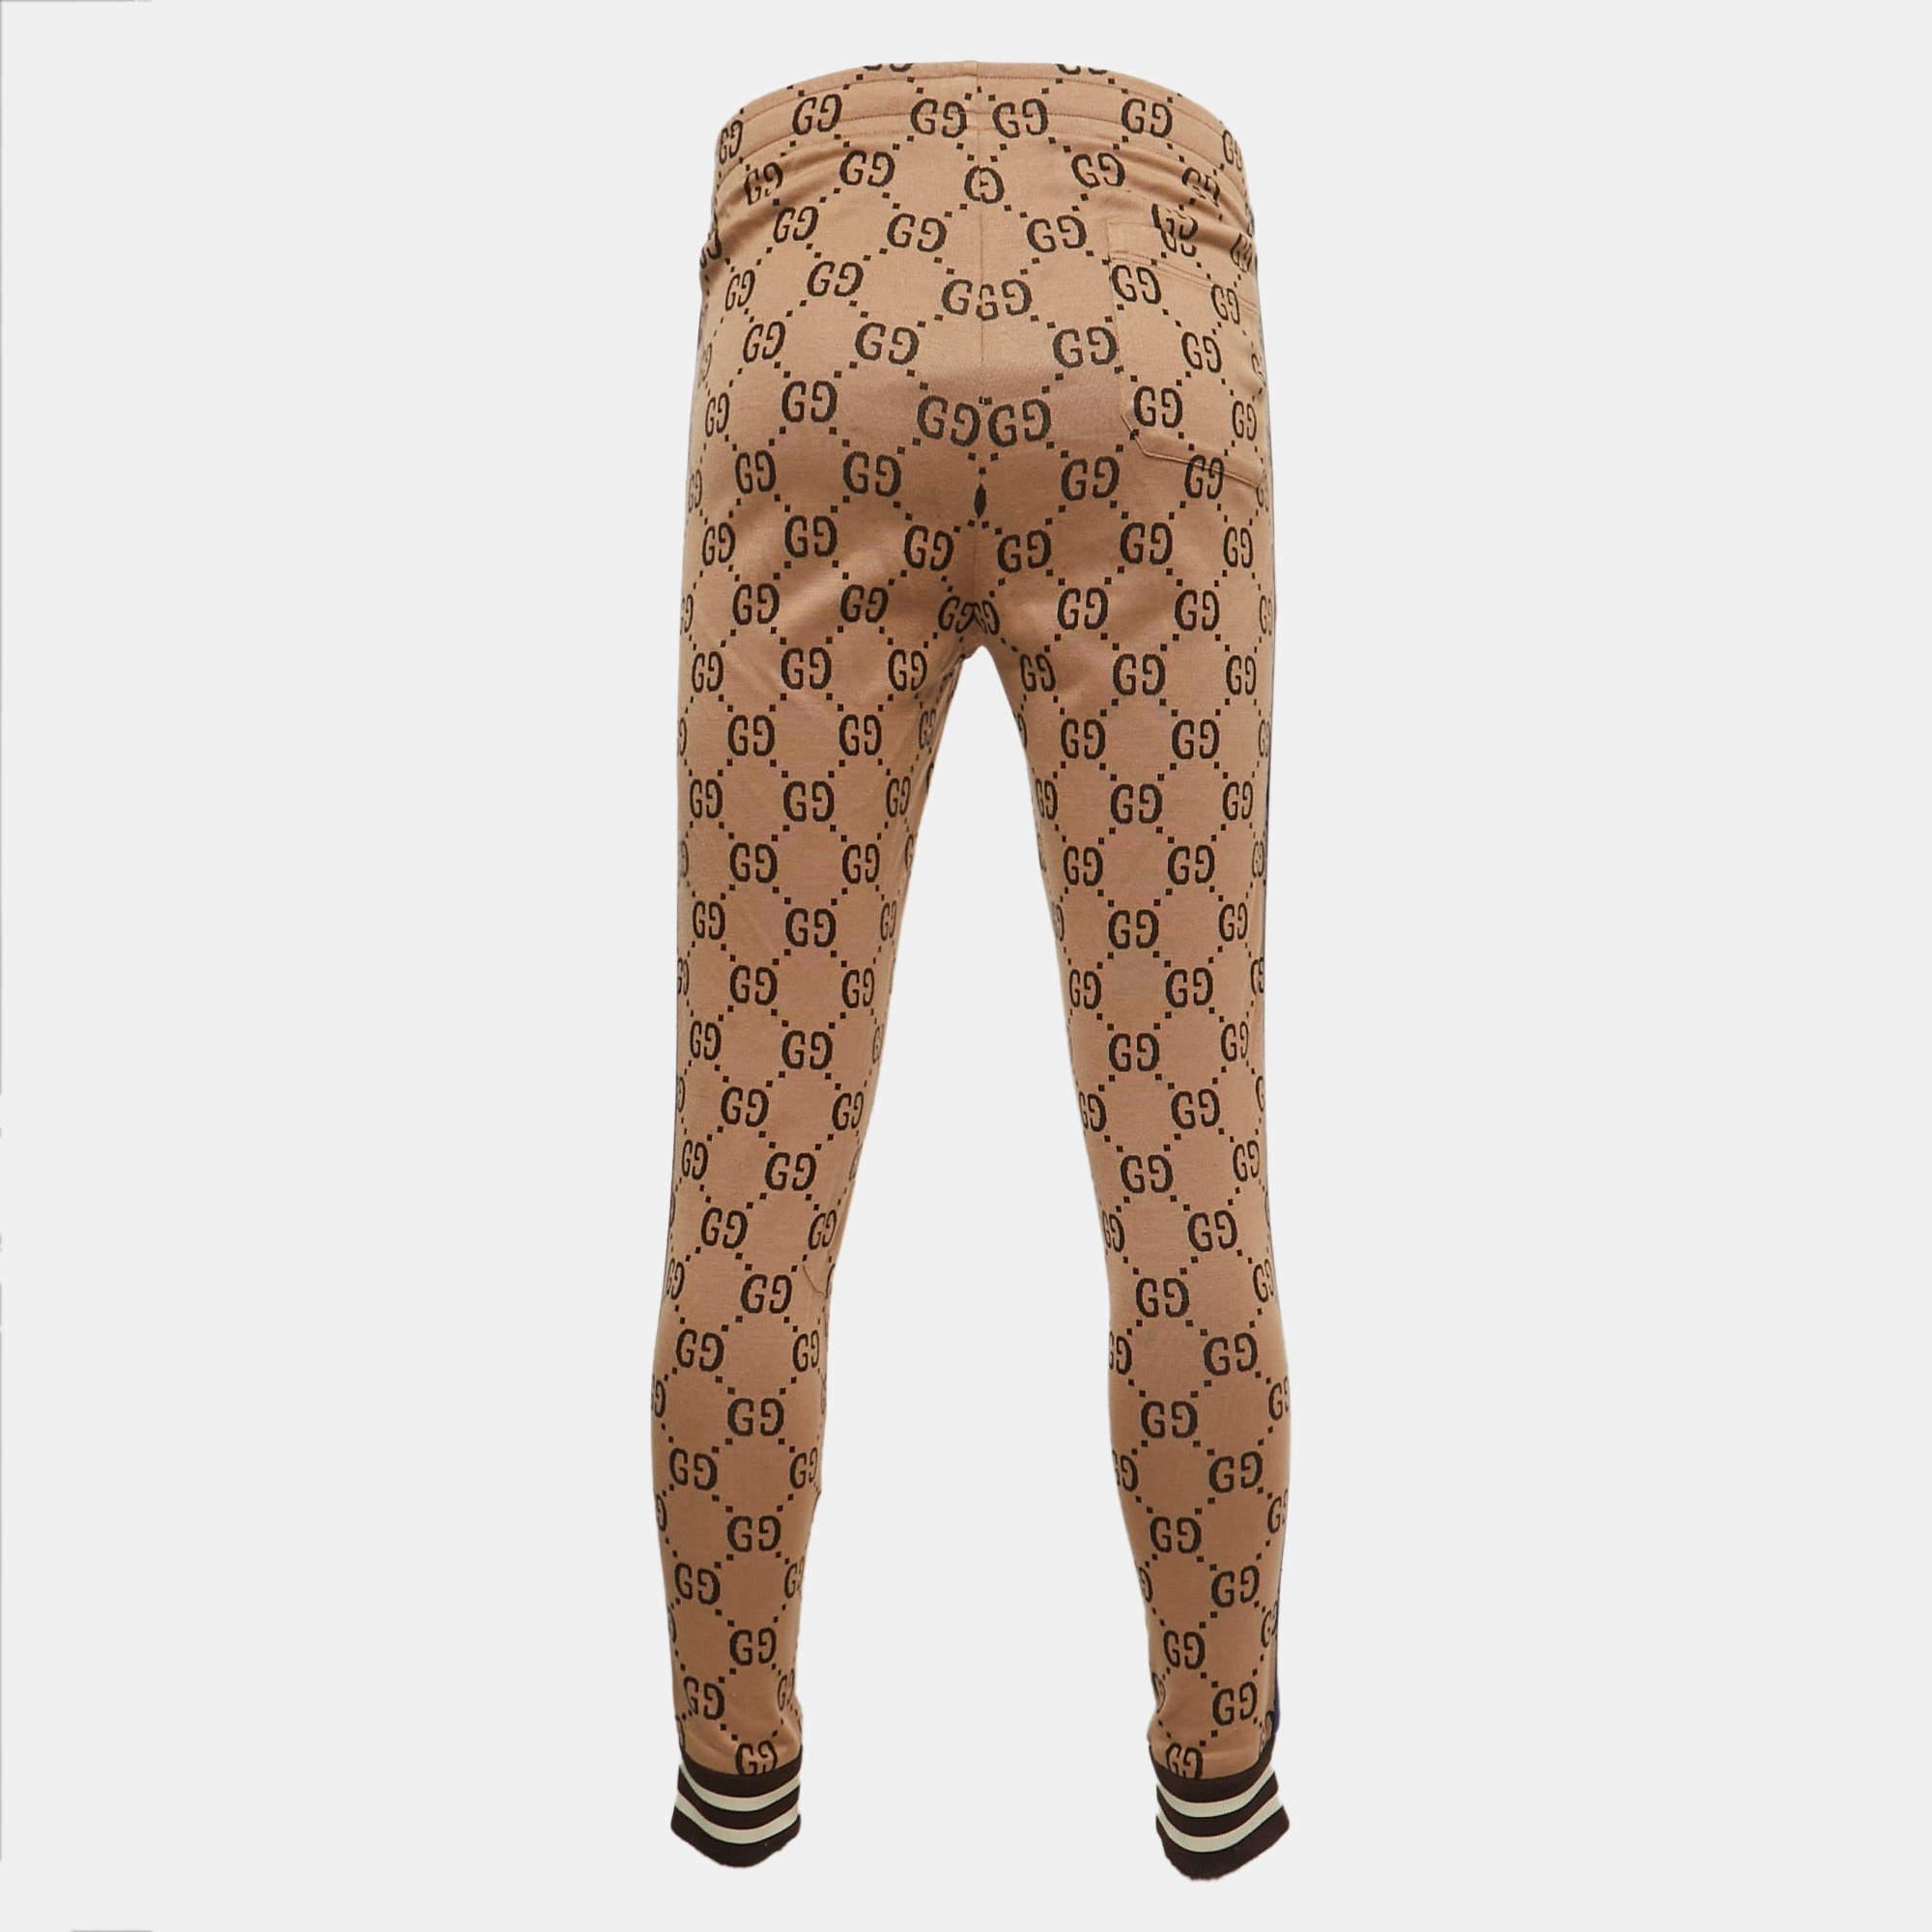 Step out for a jog with these super-stylish jog pants, lounge around, or go out to run errands, the creation will make you feel comfortable all day. It has been made using high-grade materials and will go well with sneakers, t-shirts, or sweatshirts